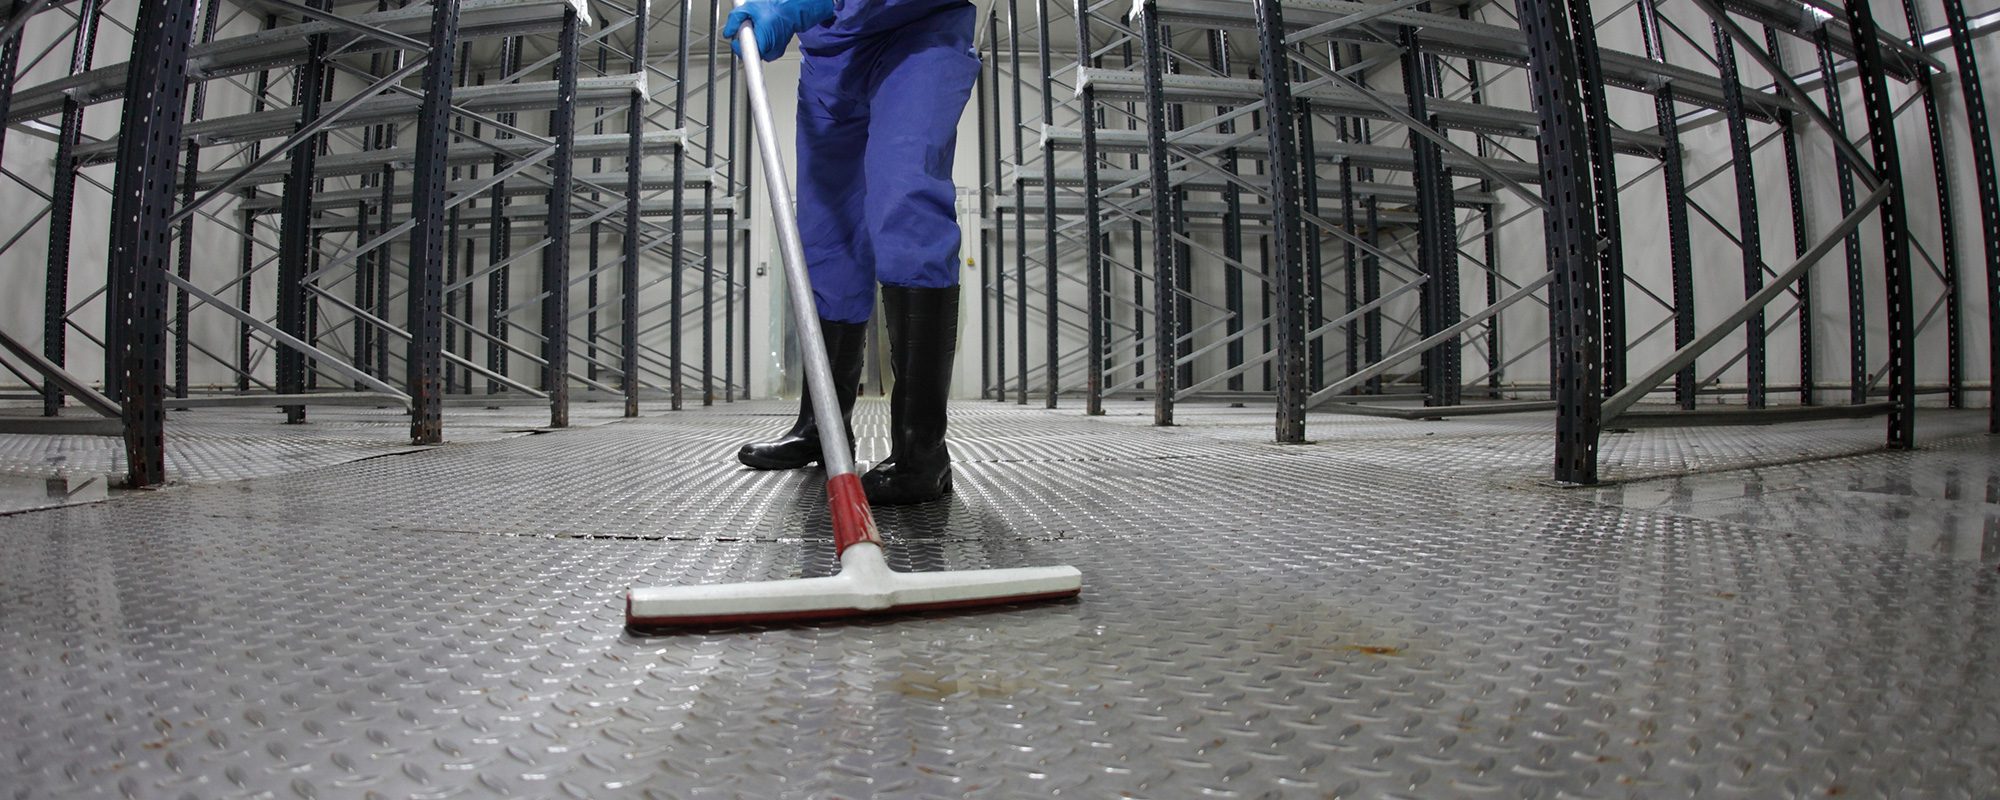 Industrial cleaning services